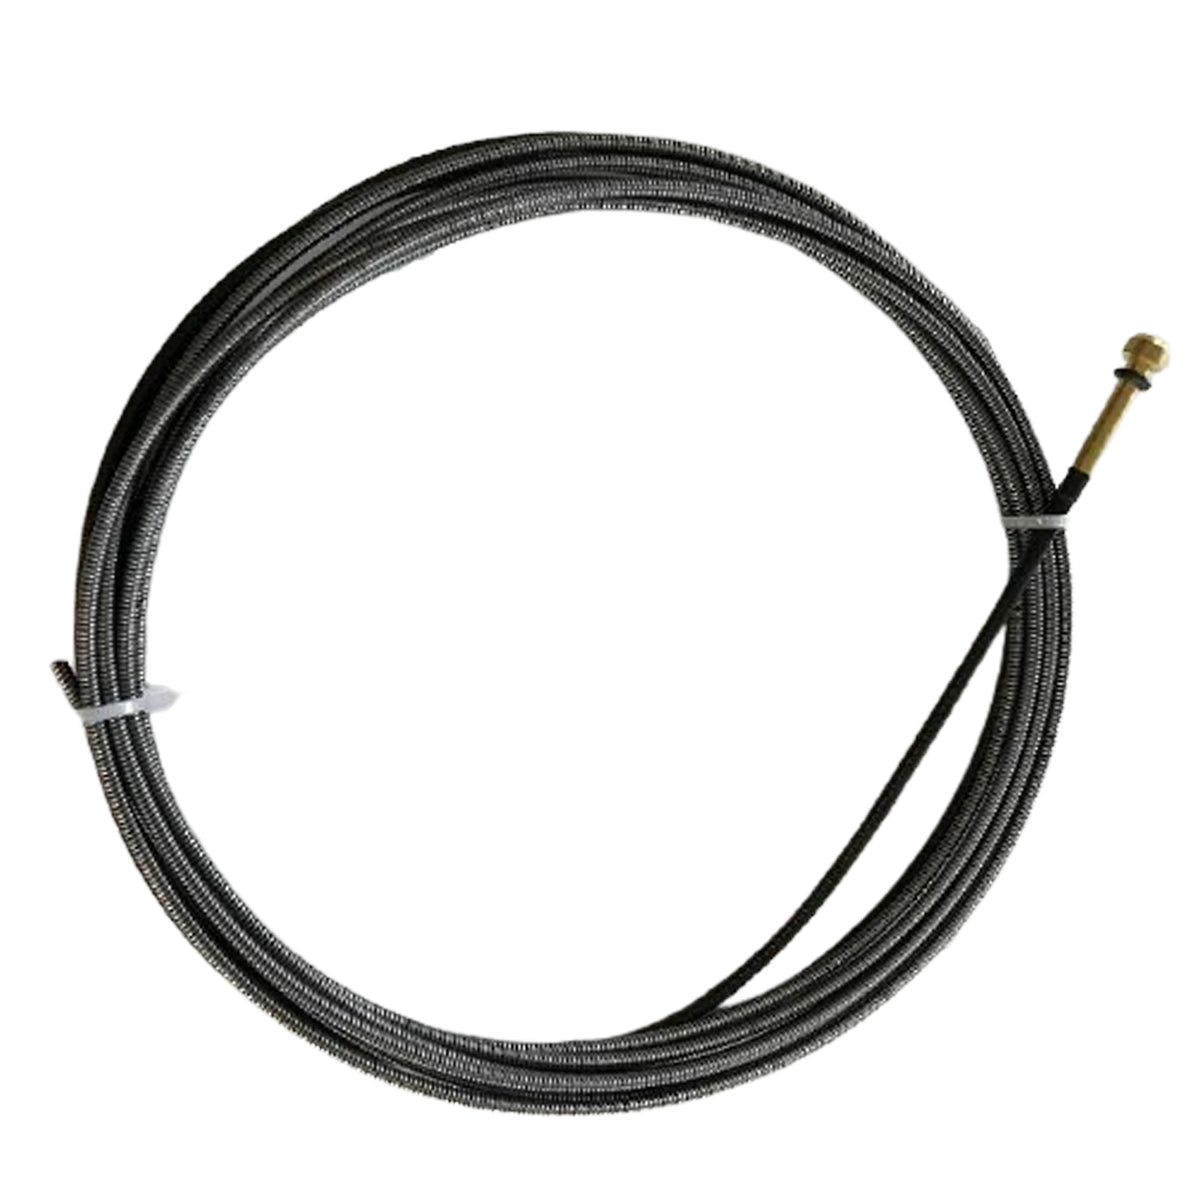 Liner 15ft fit up to .035 Wires fit Lincoln SP140T SP 140T 11658 Welder